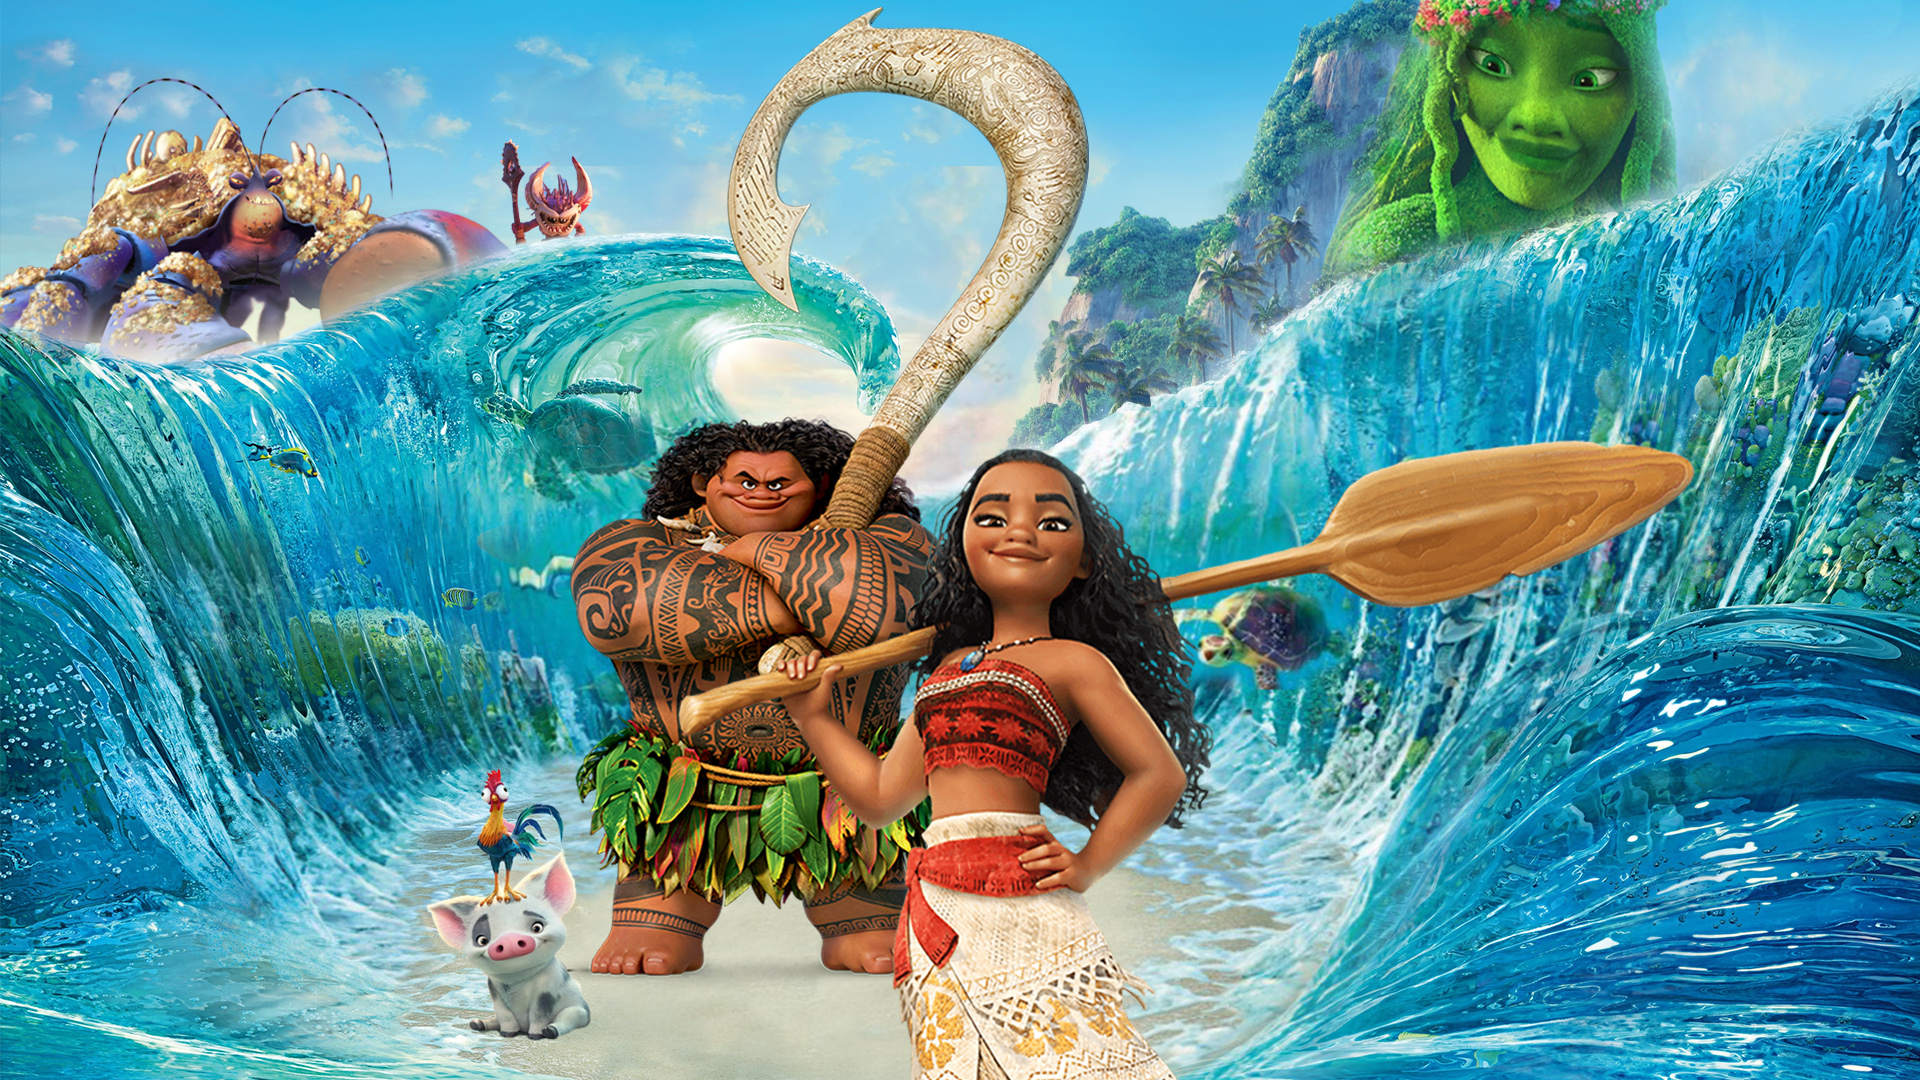 Moana 2: What is the storyline of Moana 2.